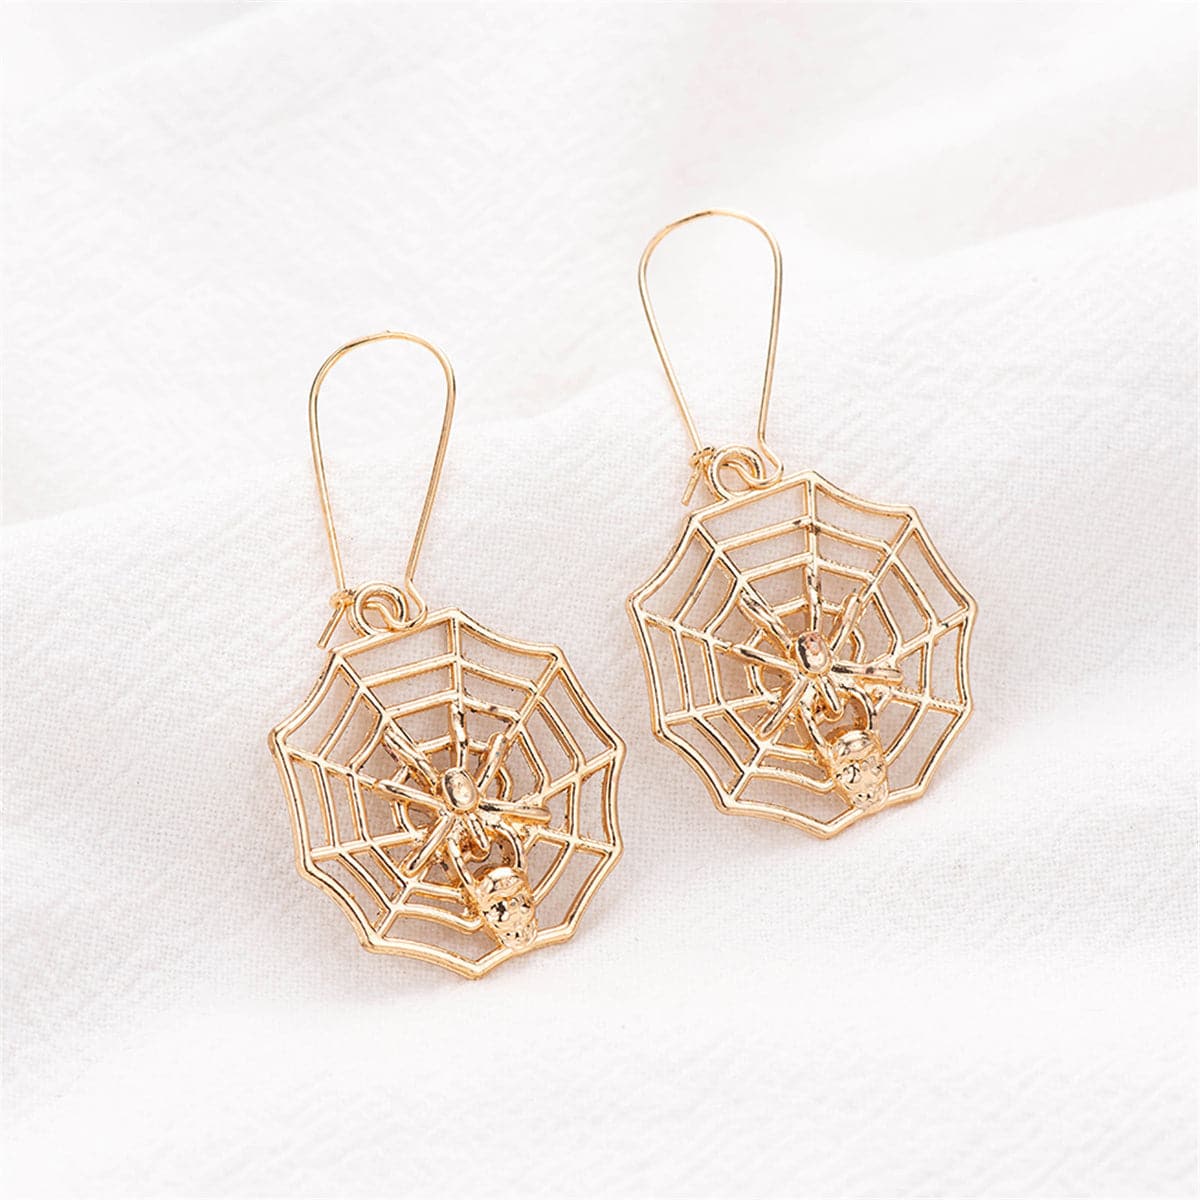 18K Gold-Plated Spider Web Drop Earrings